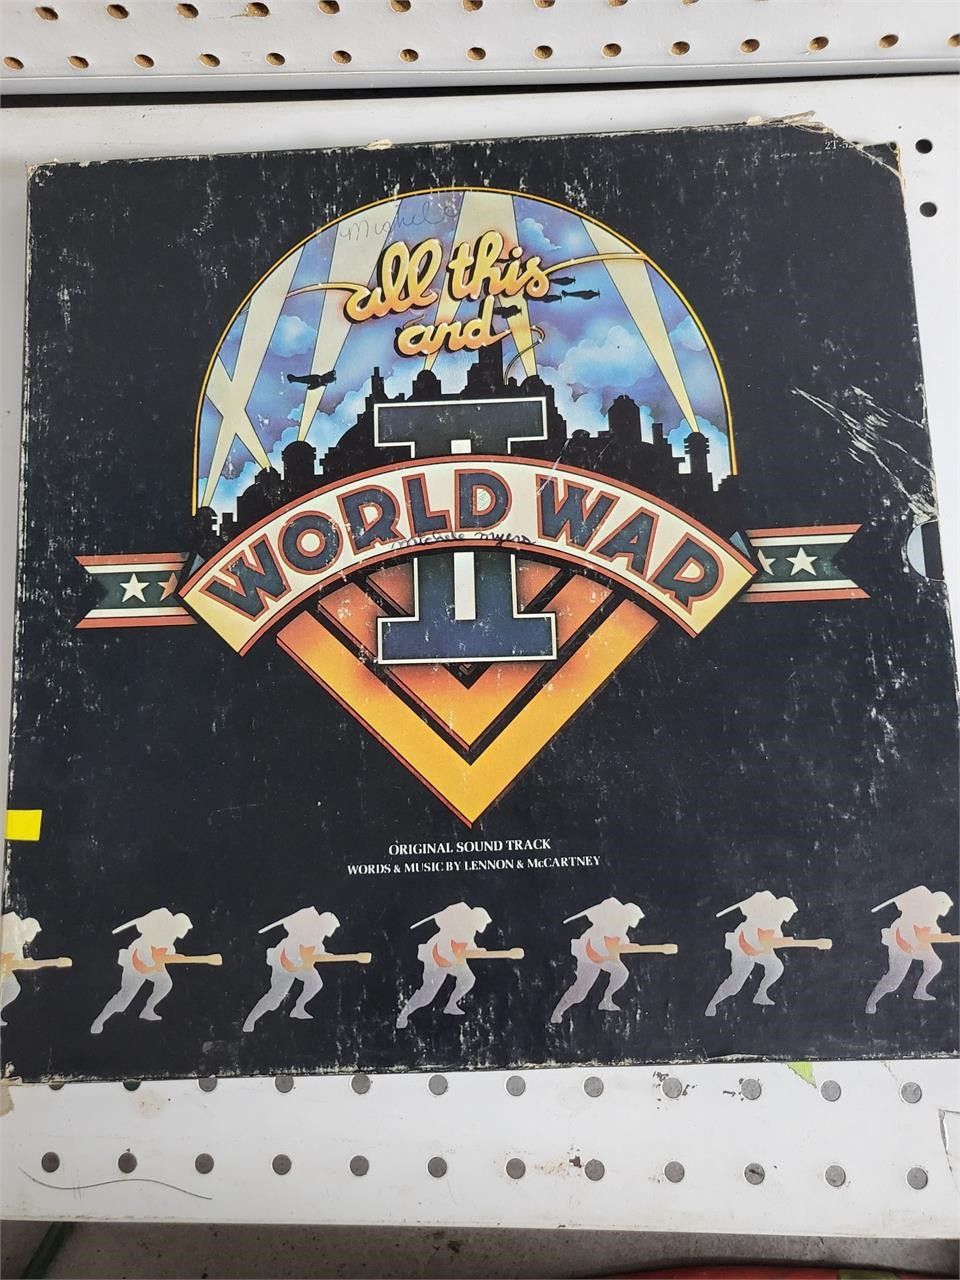 Beatle Covers ALL THIS AND WORLD WAR II 1976